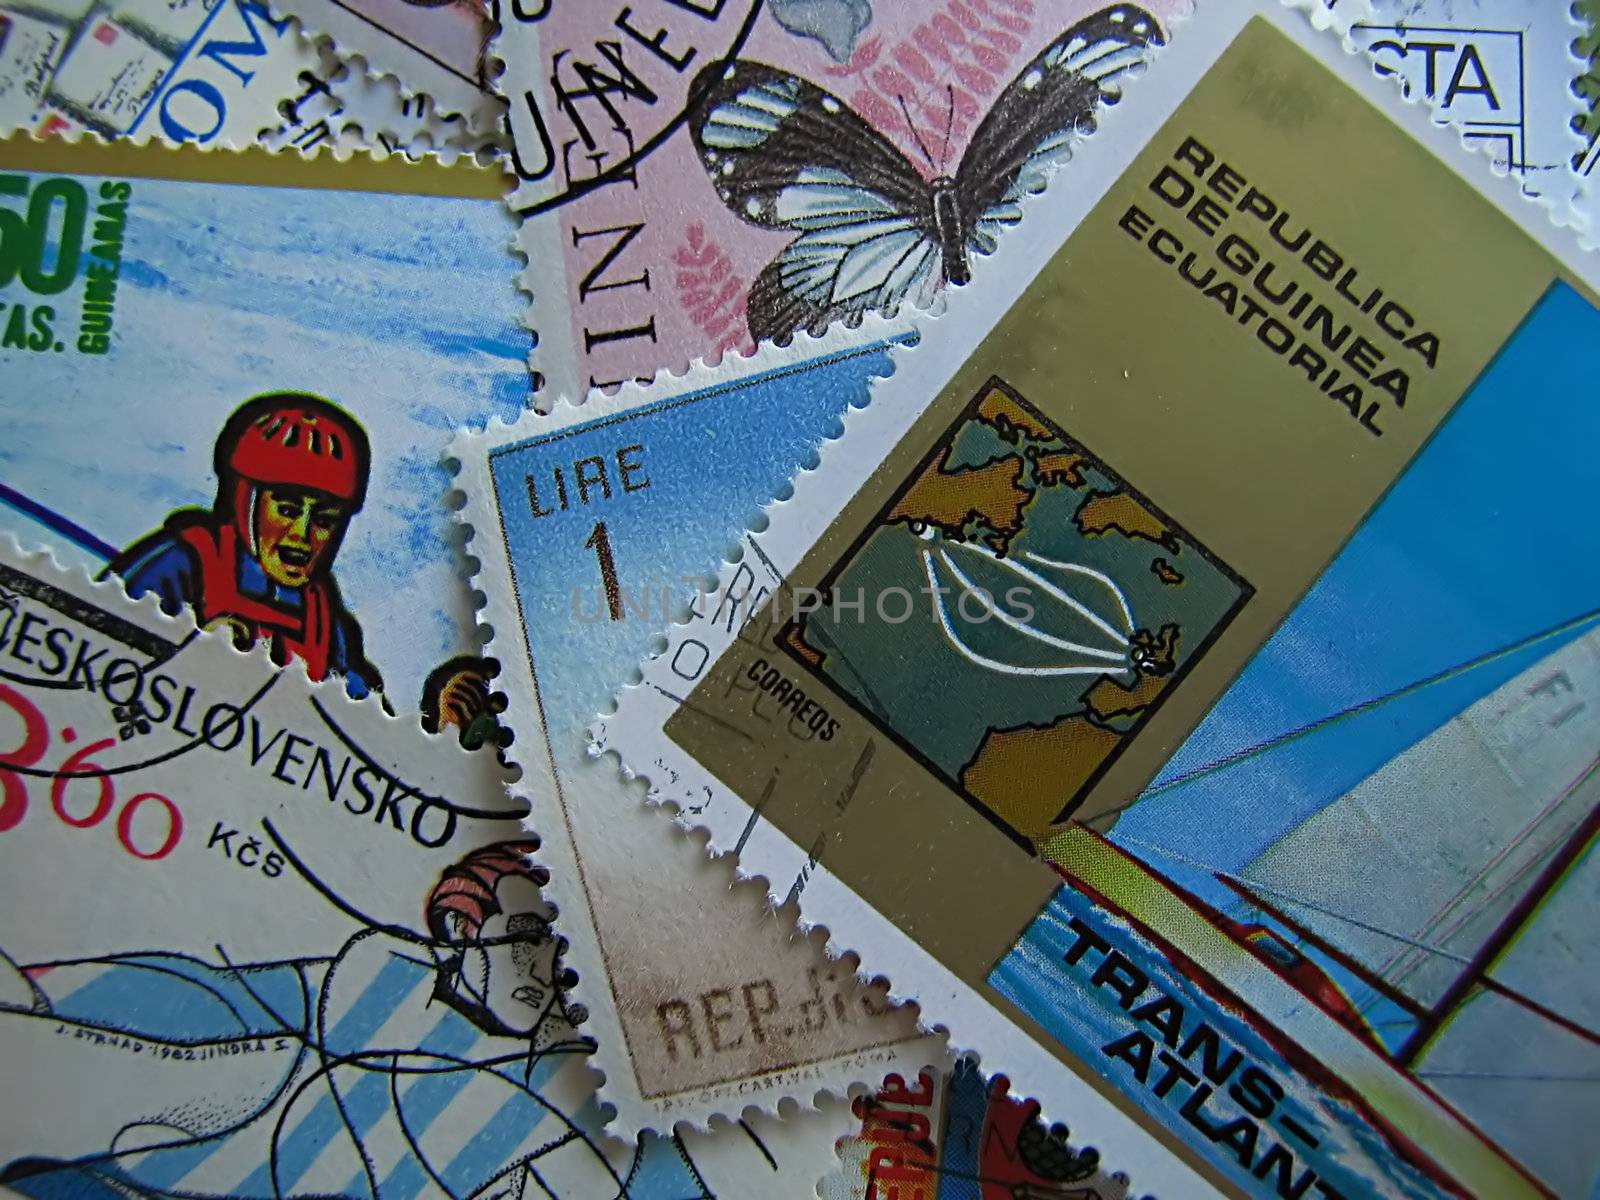 A photograph of various world postage stamps.